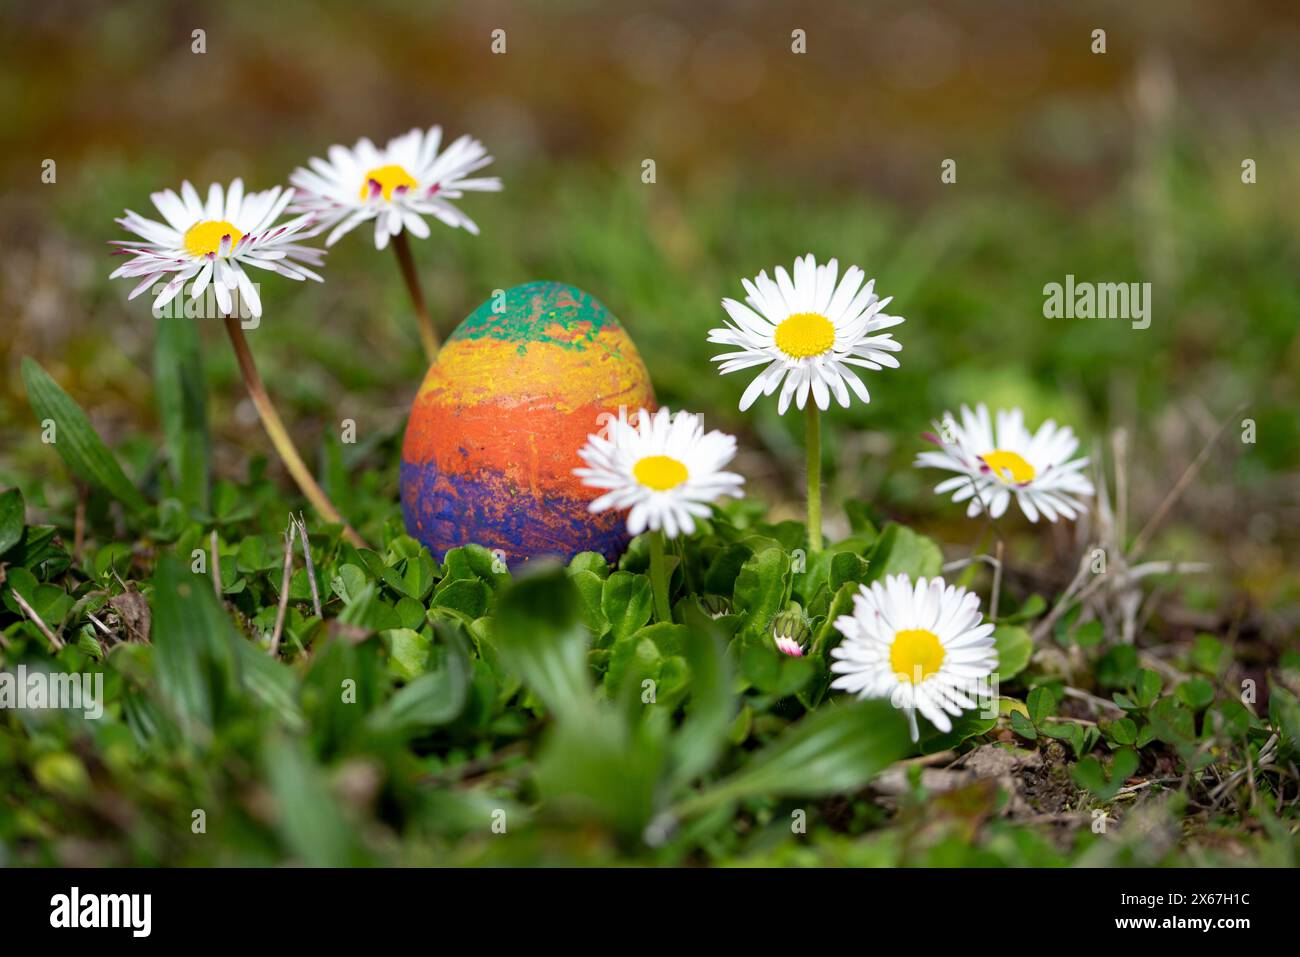 Painted Easter egg standing between daisies, Germany. Stock Photo